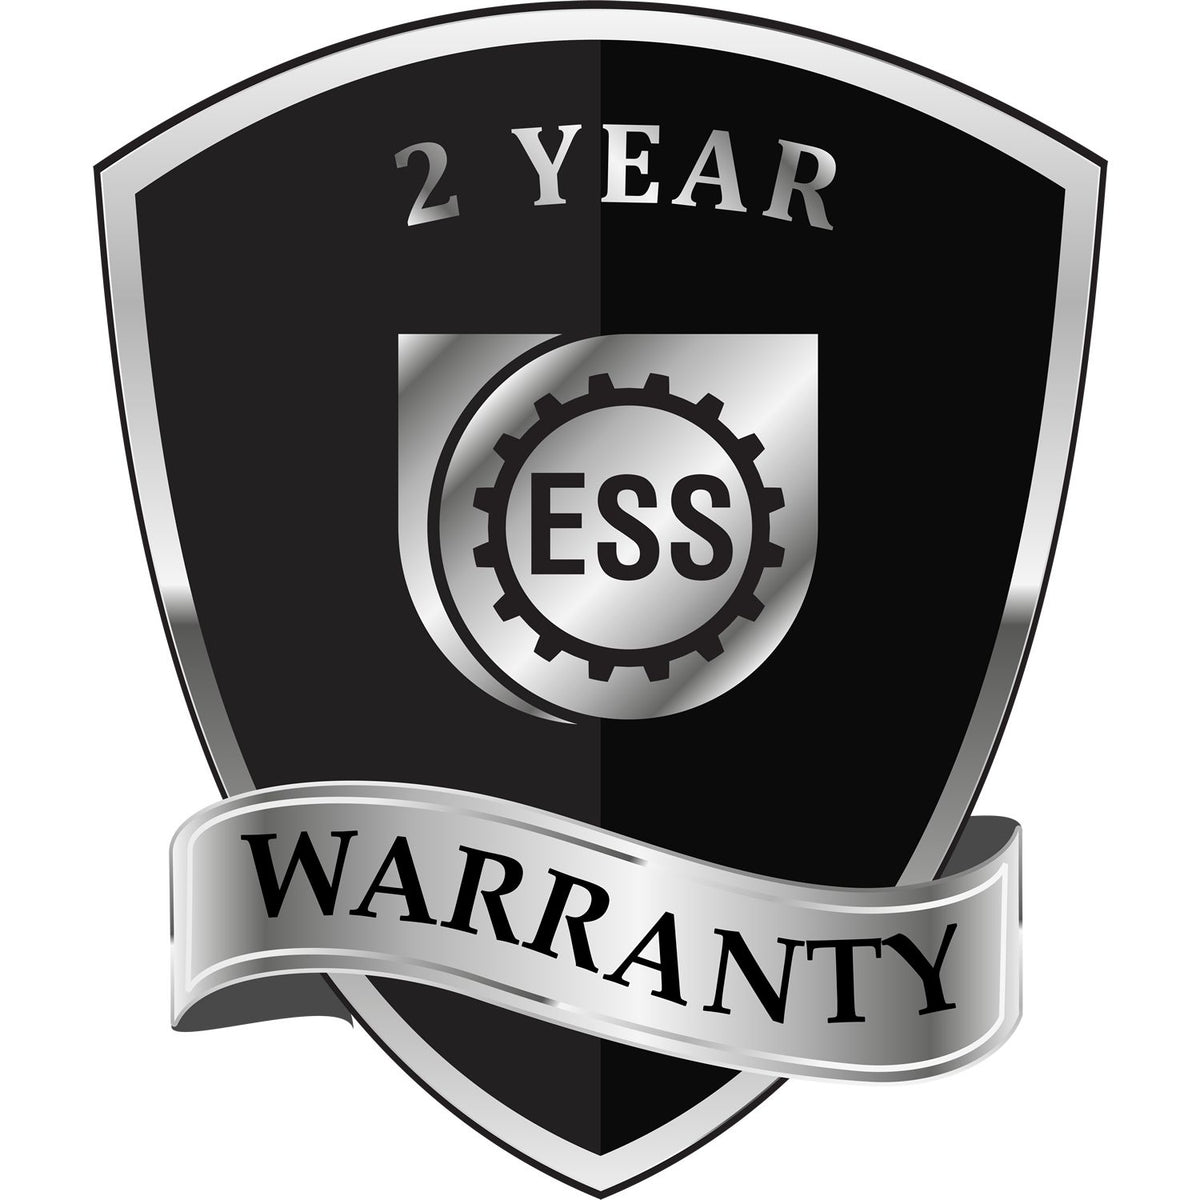 A badge or emblem showing a warranty icon for the Heavy Duty Cast Iron Kansas Architect Embosser